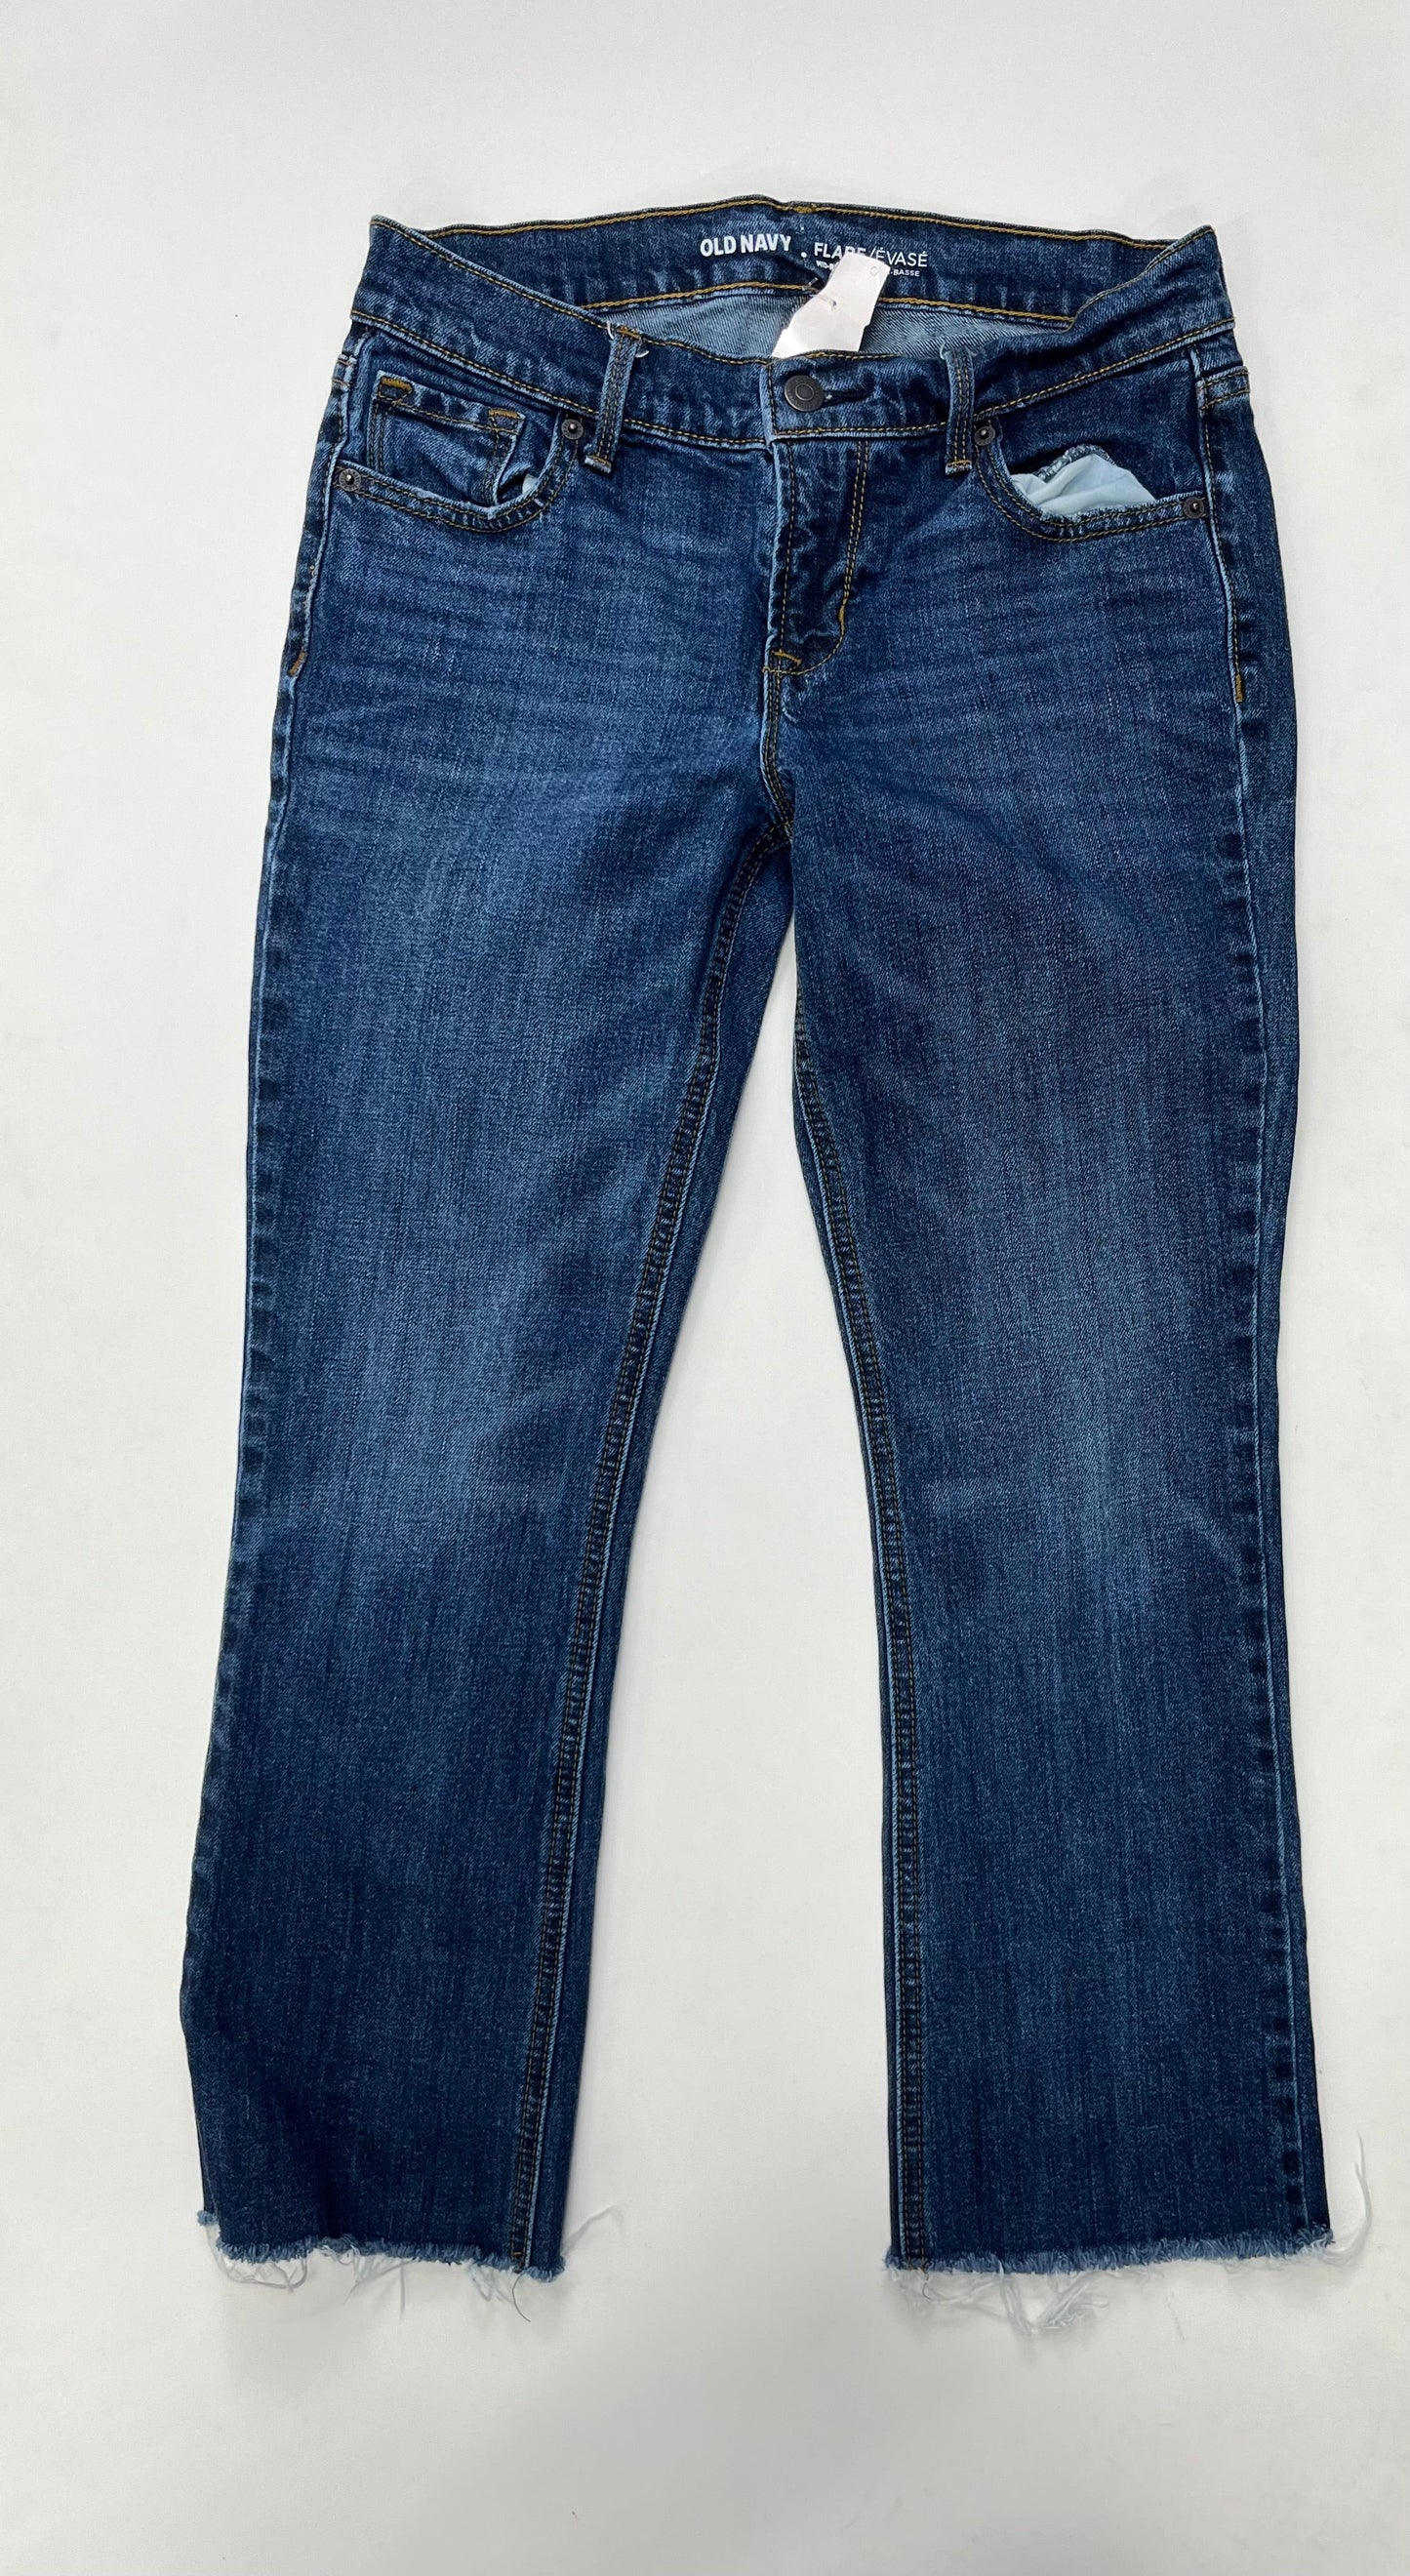 Jeans By Old Navy  Size: 2